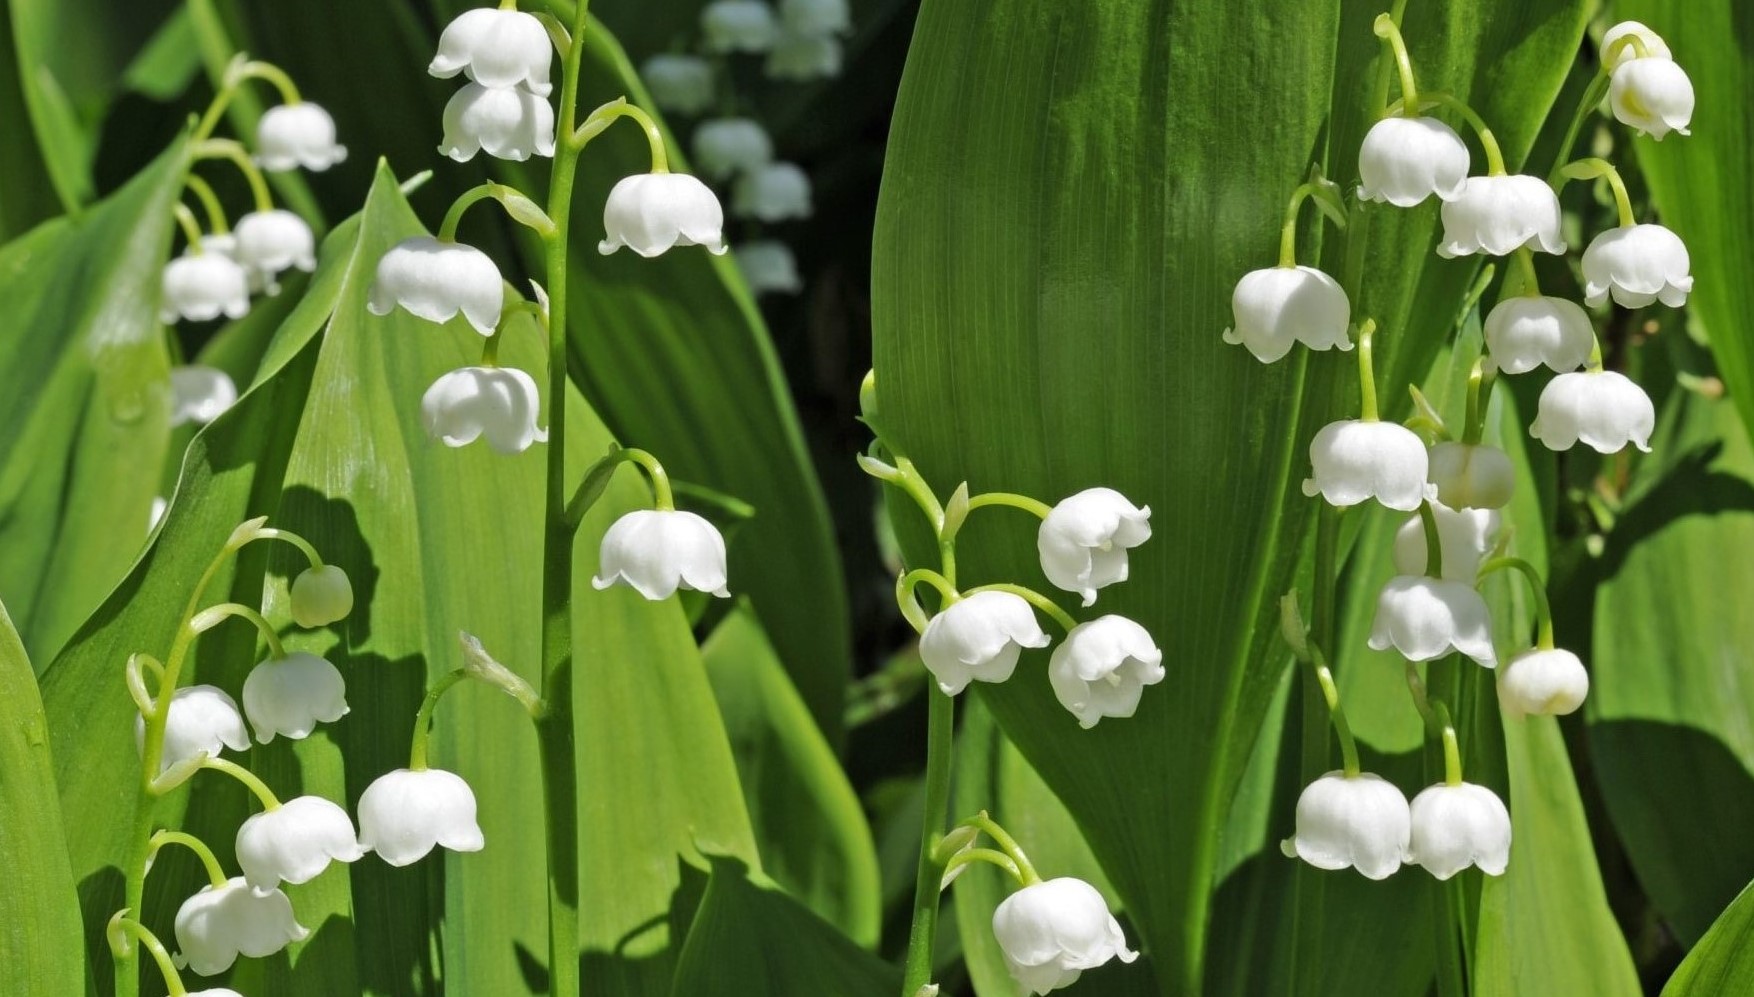 8 Astounding Facts About Convallaria - Facts.net